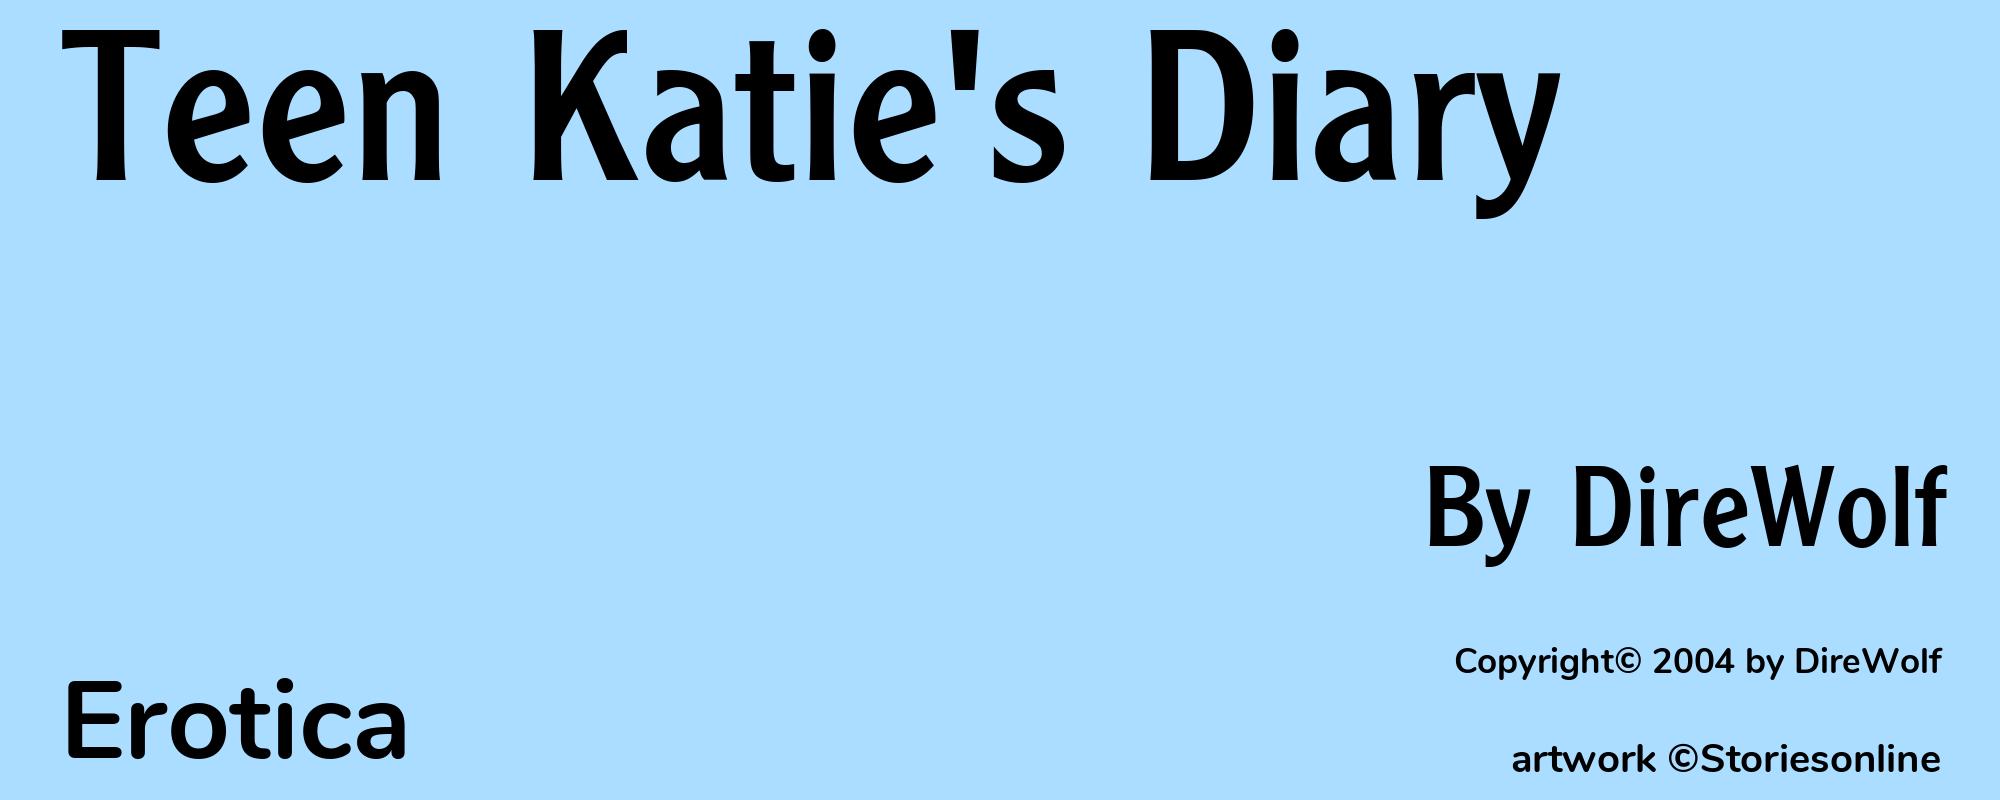 Teen Katie's Diary - Cover